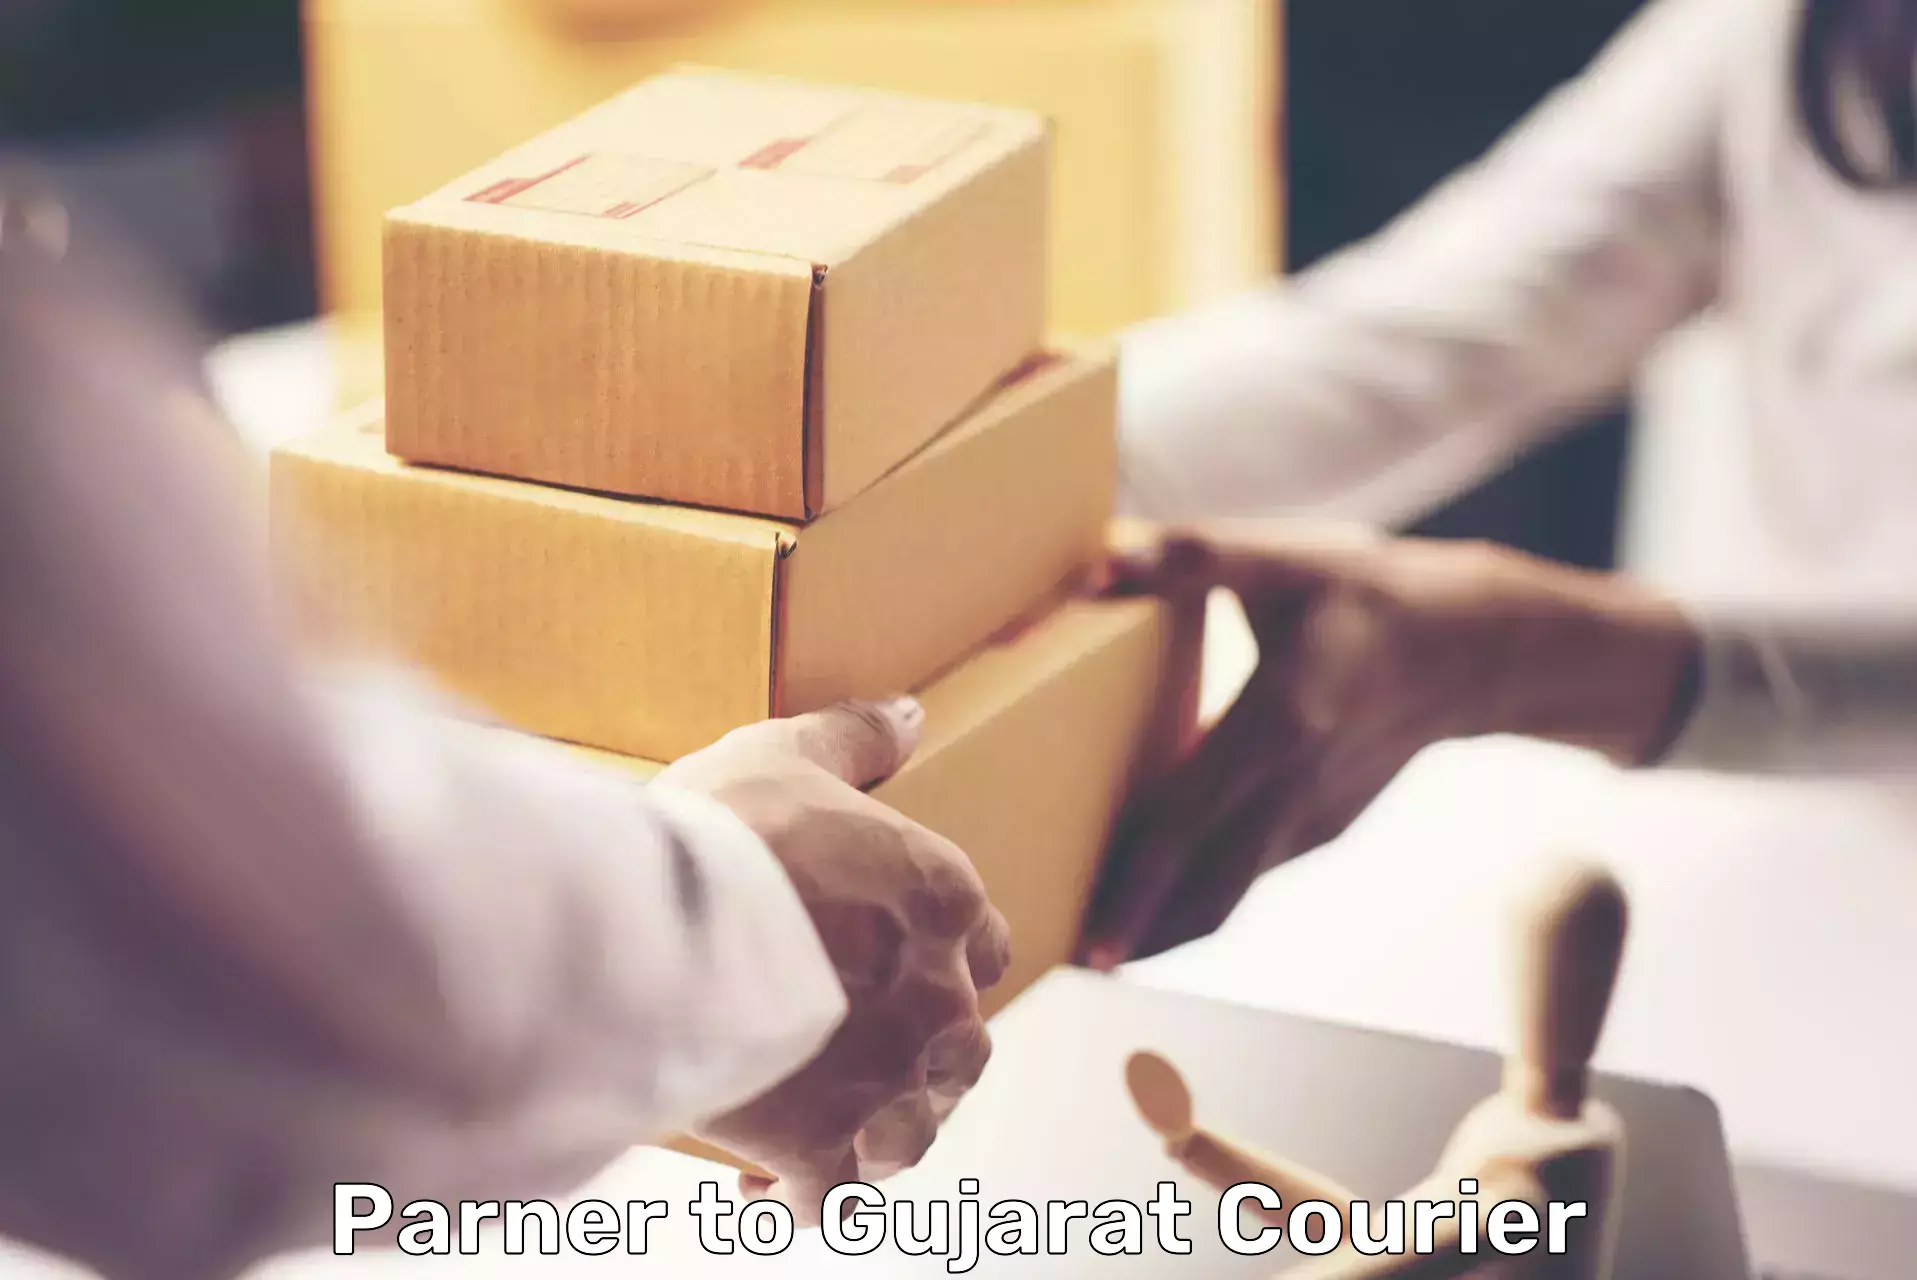 Simplified shipping solutions Parner to Rajkot